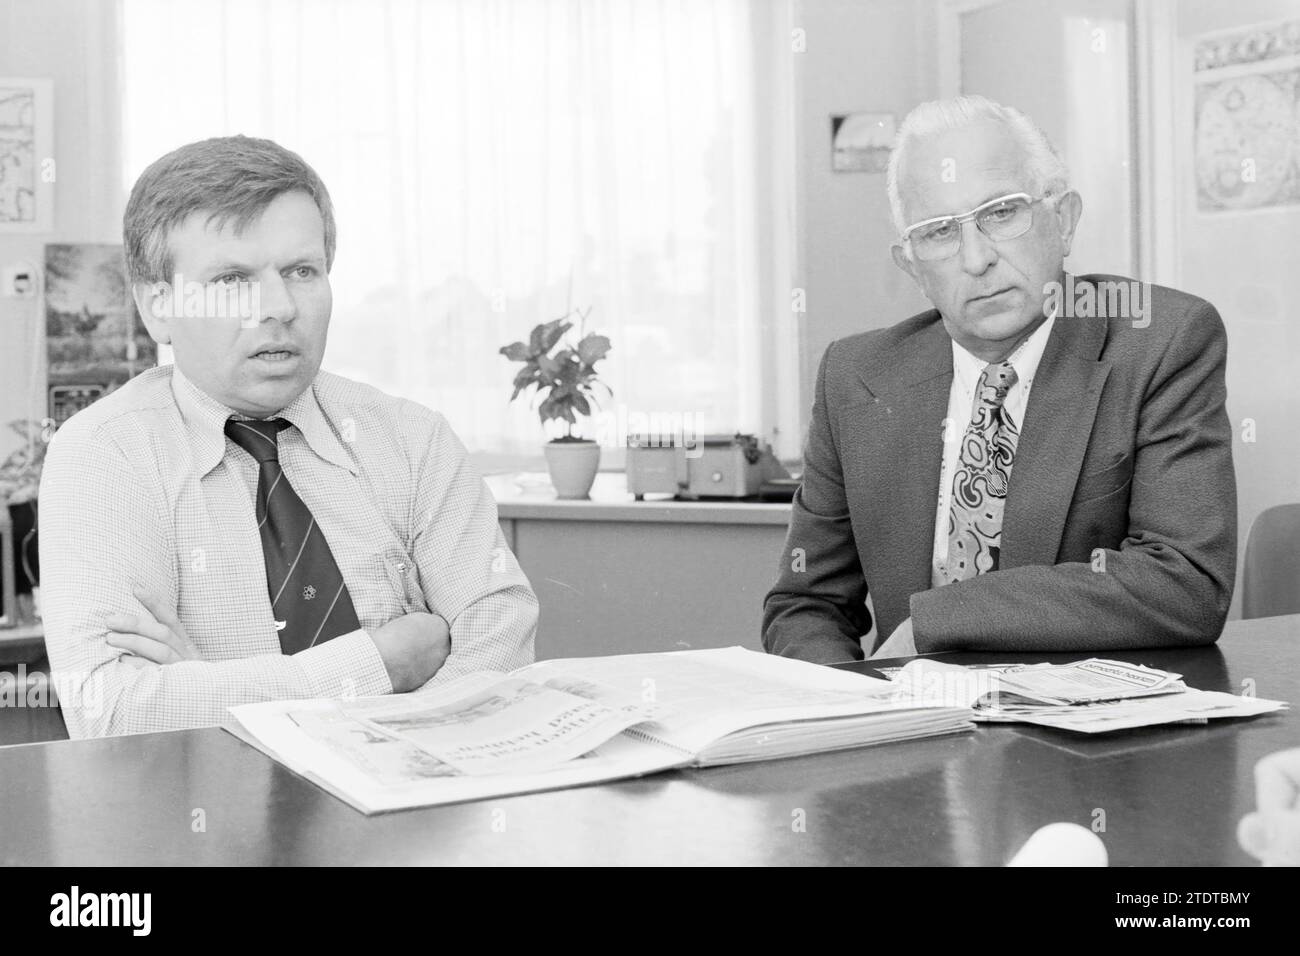 2 gentlemen at desk., 00-00-1978, Whizgle News from the Past, Tailored for the Future. Explore historical narratives, Dutch The Netherlands agency image with a modern perspective, bridging the gap between yesterday's events and tomorrow's insights. A timeless journey shaping the stories that shape our future Stock Photo